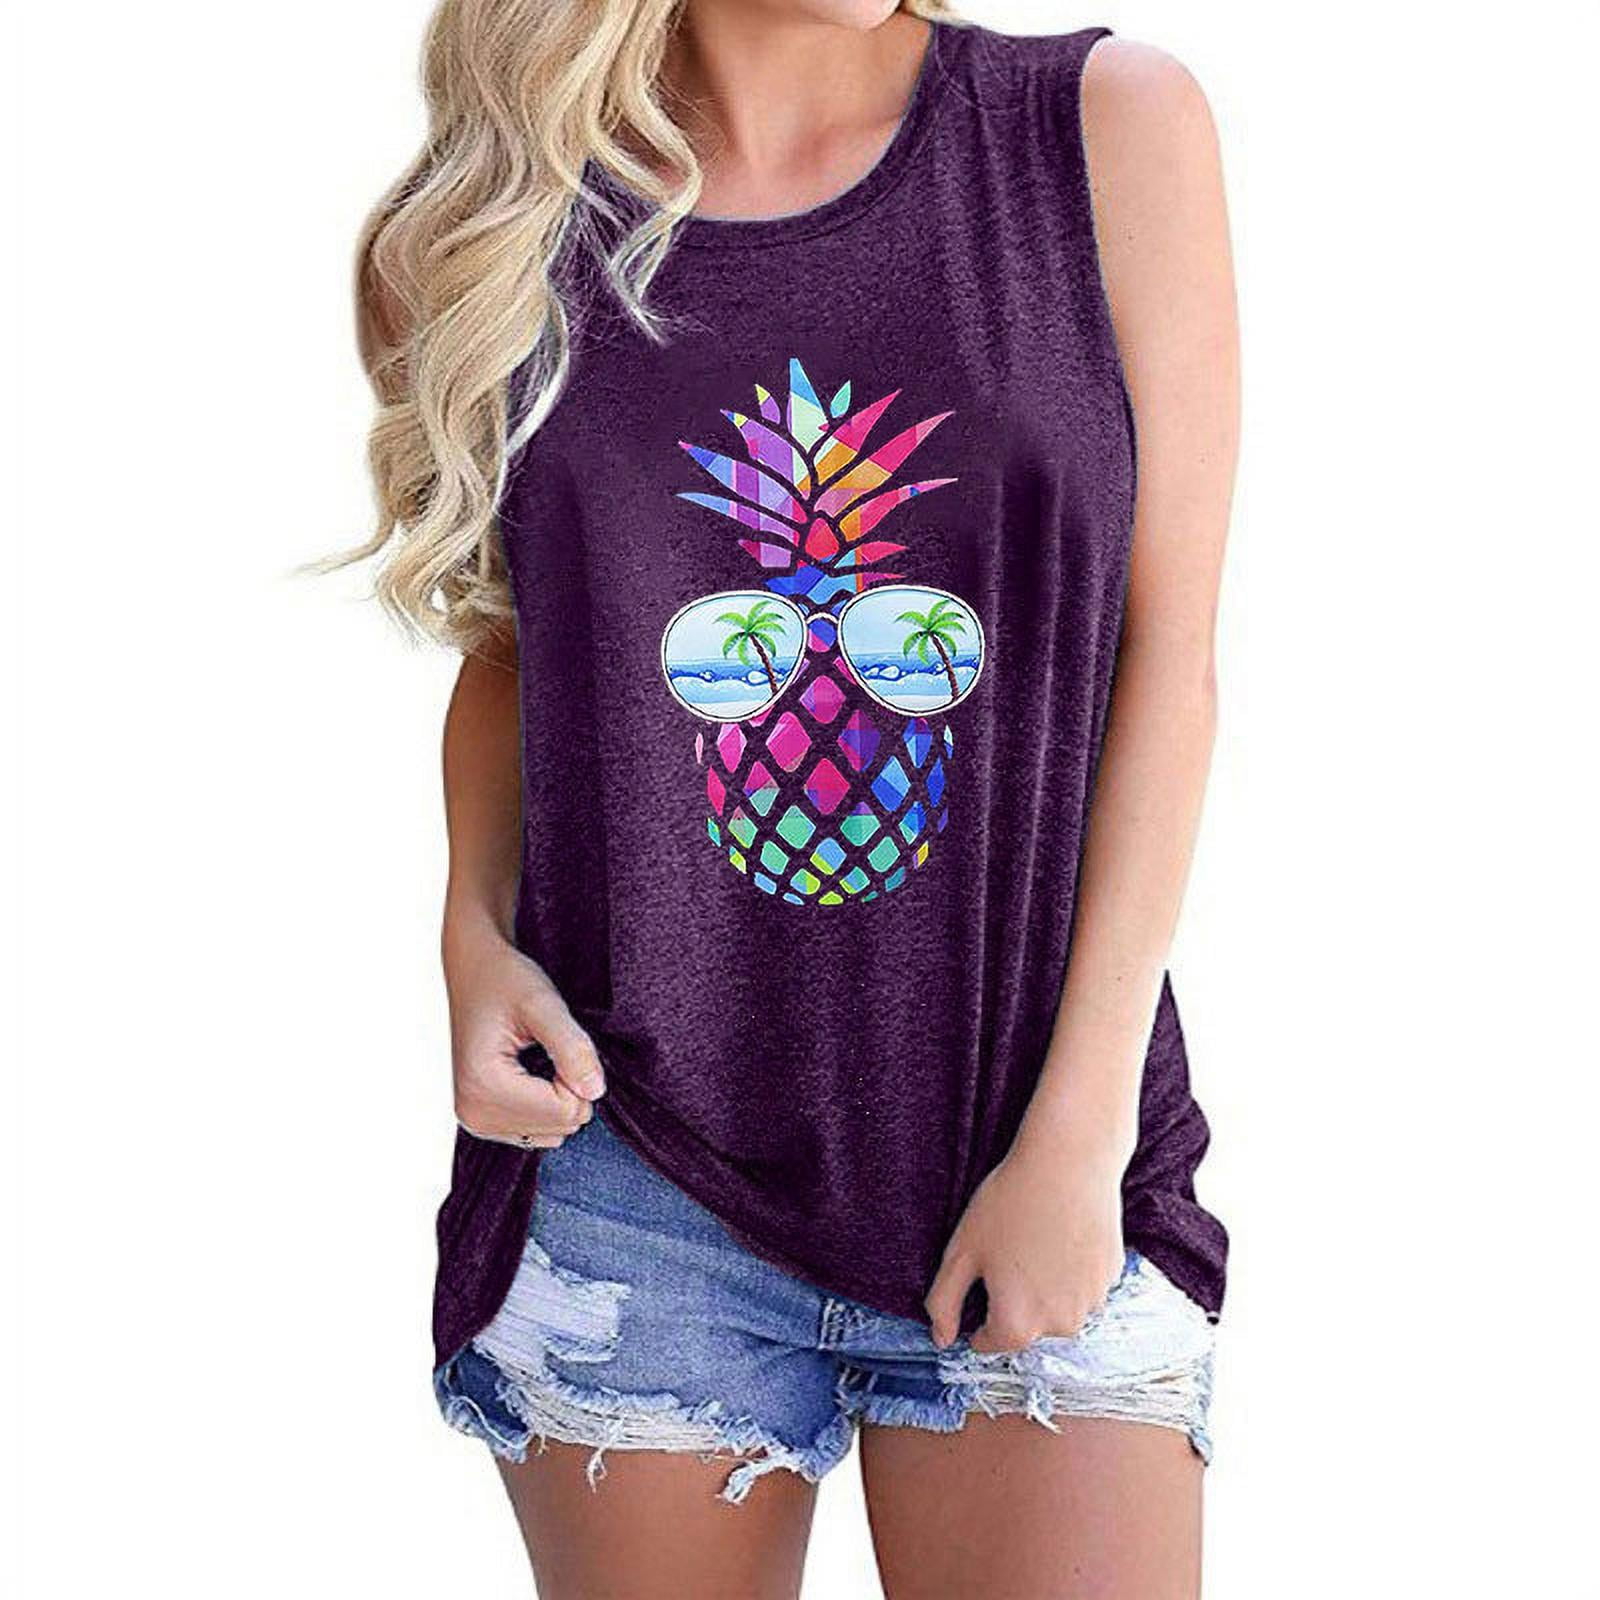 Women's Summer Graphic Tank Tops Workout Sleeveless Funny Camping Vest Casual Vacation Tee Shirts